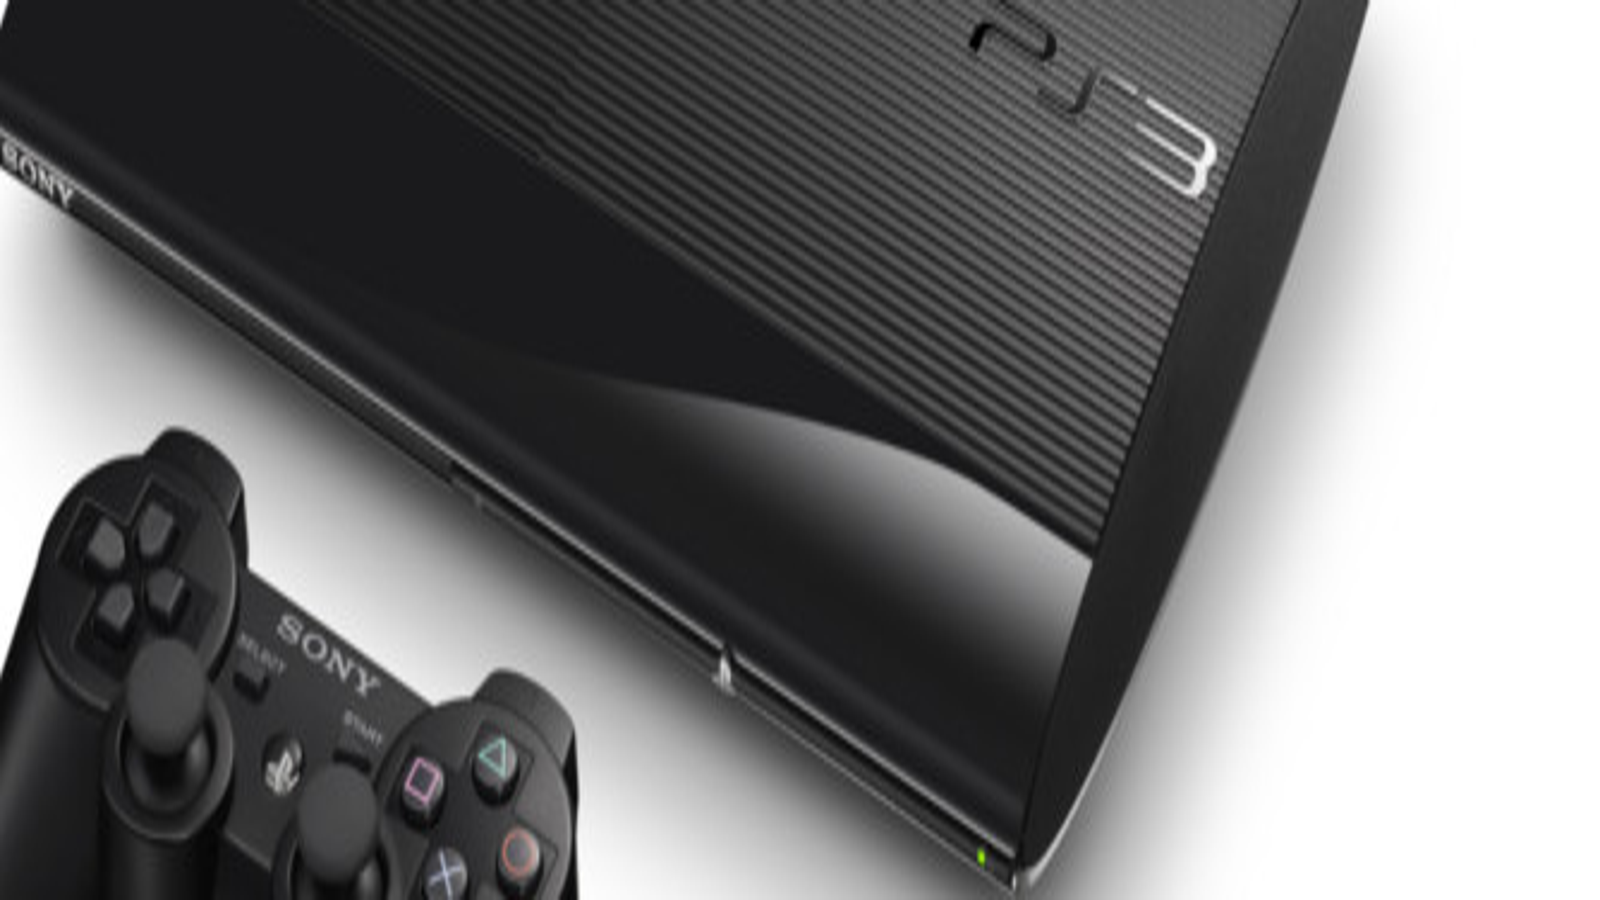 Playstation 3 (PS3) Release Date, Details, and Specs